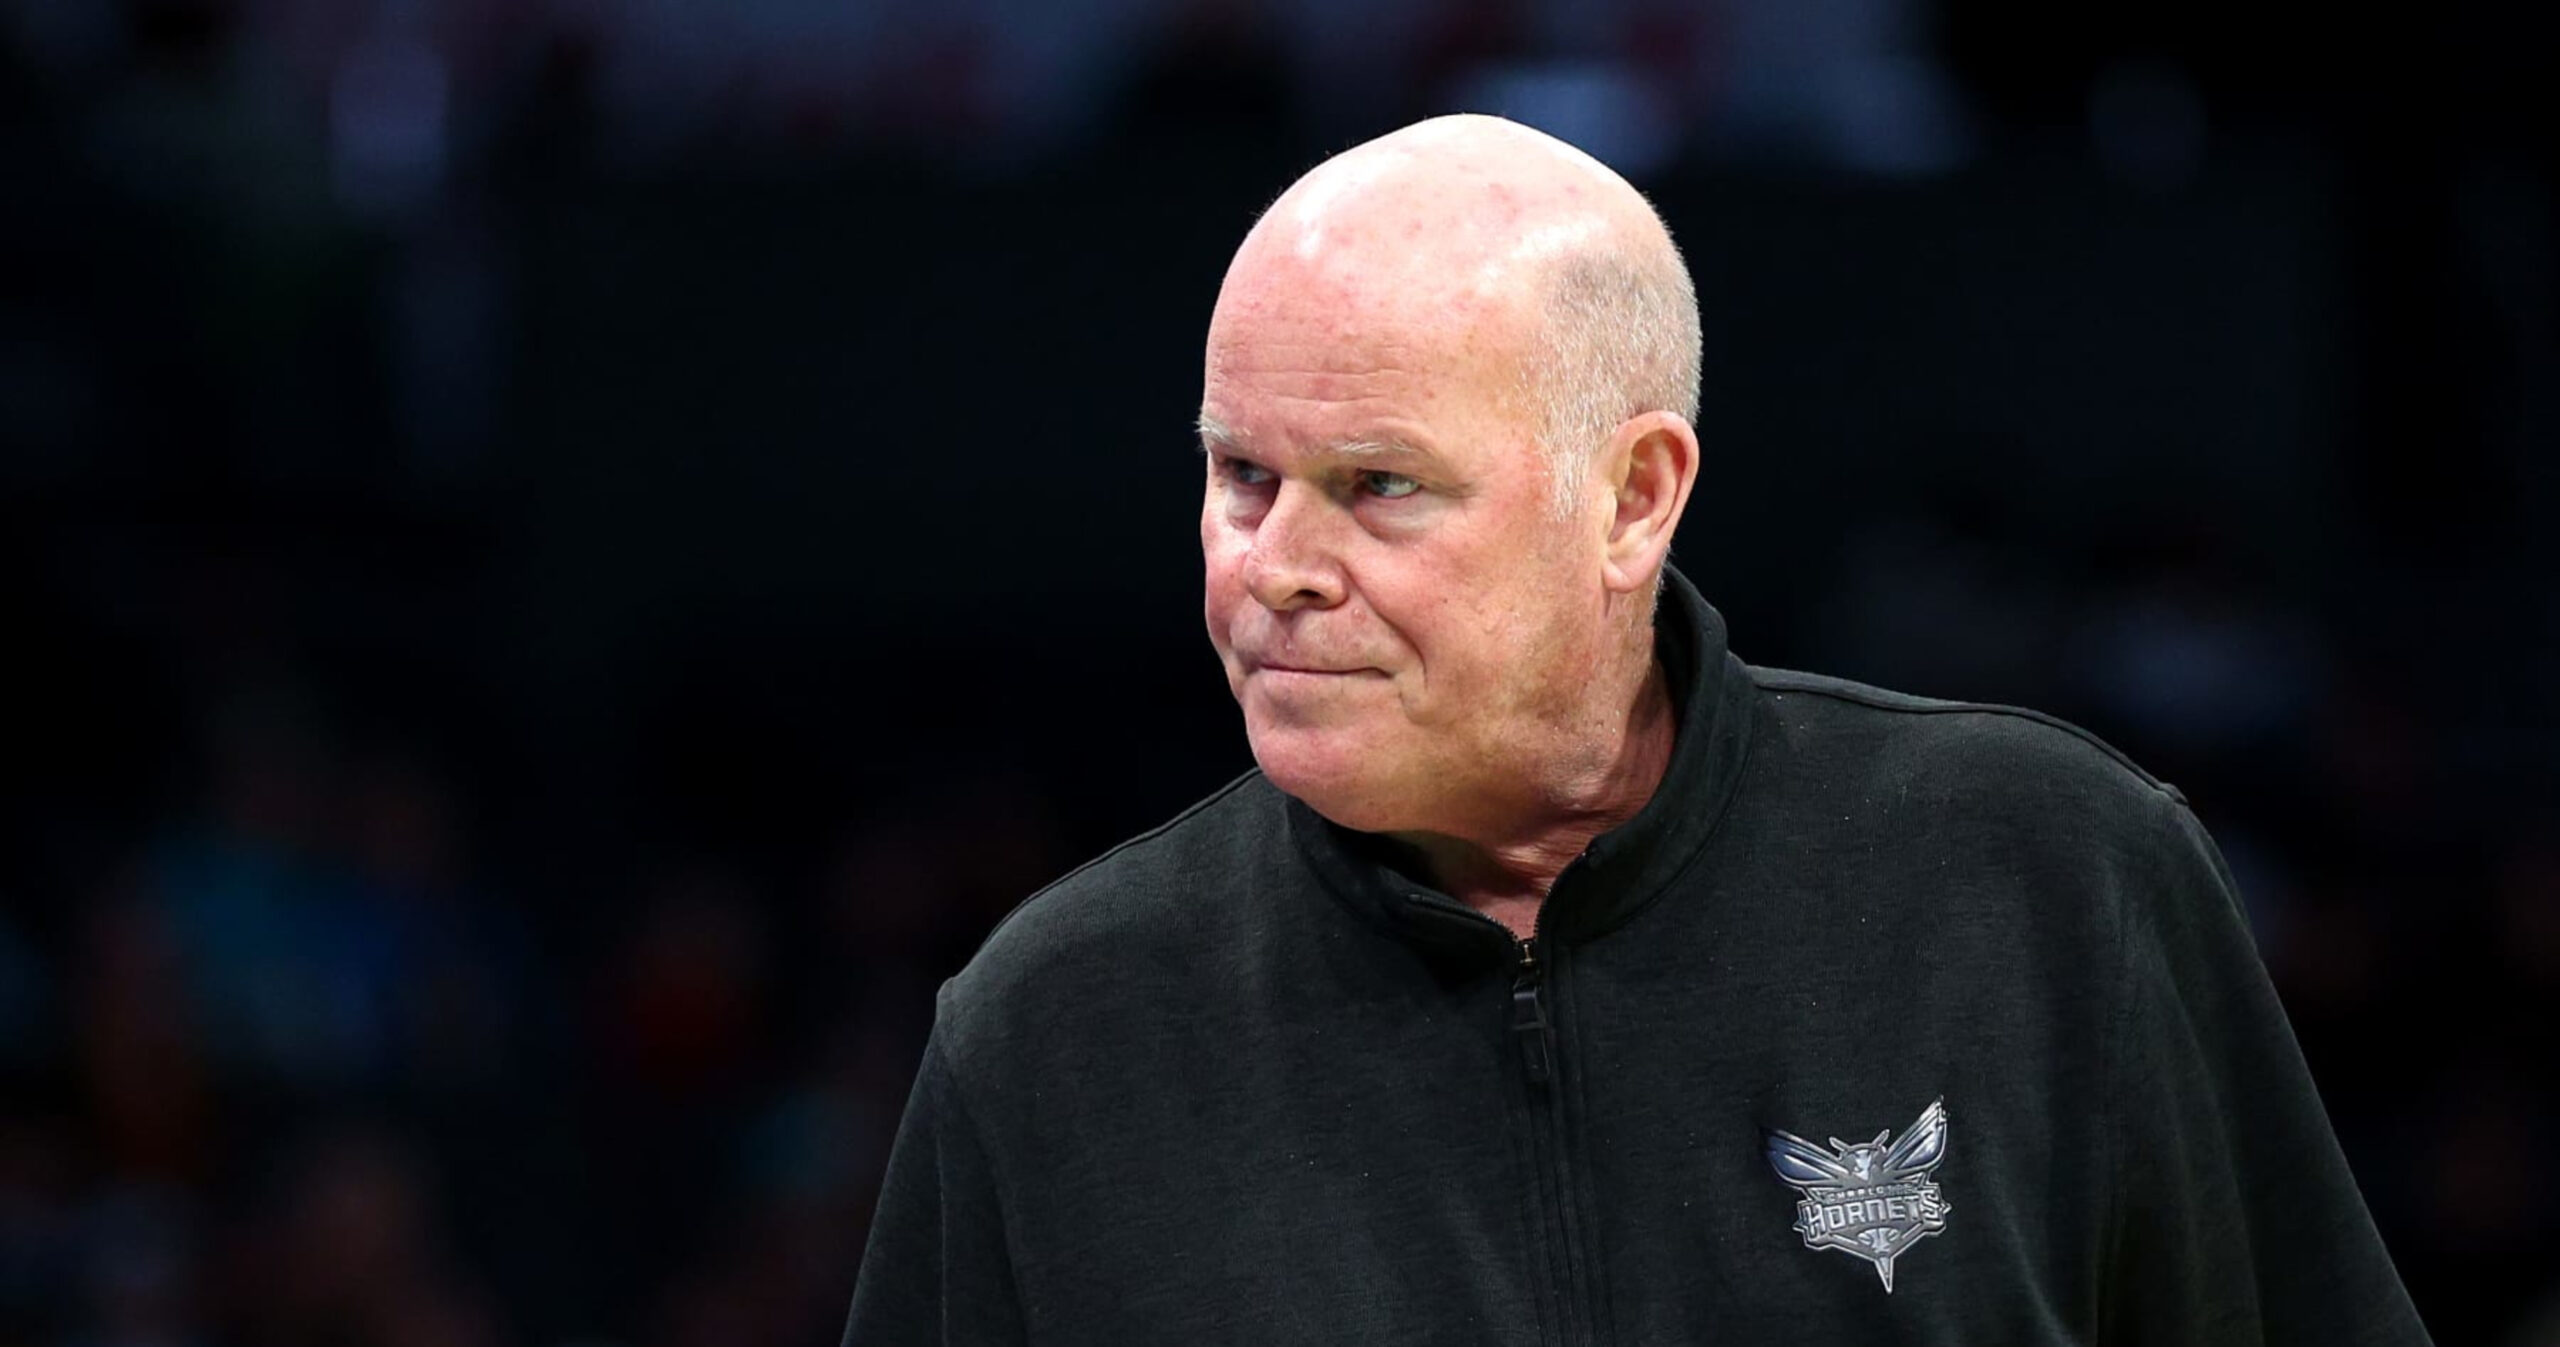 NBA Rumors: Hornets’ Steve Clifford to Step Down as HC, Move to Front Office Role